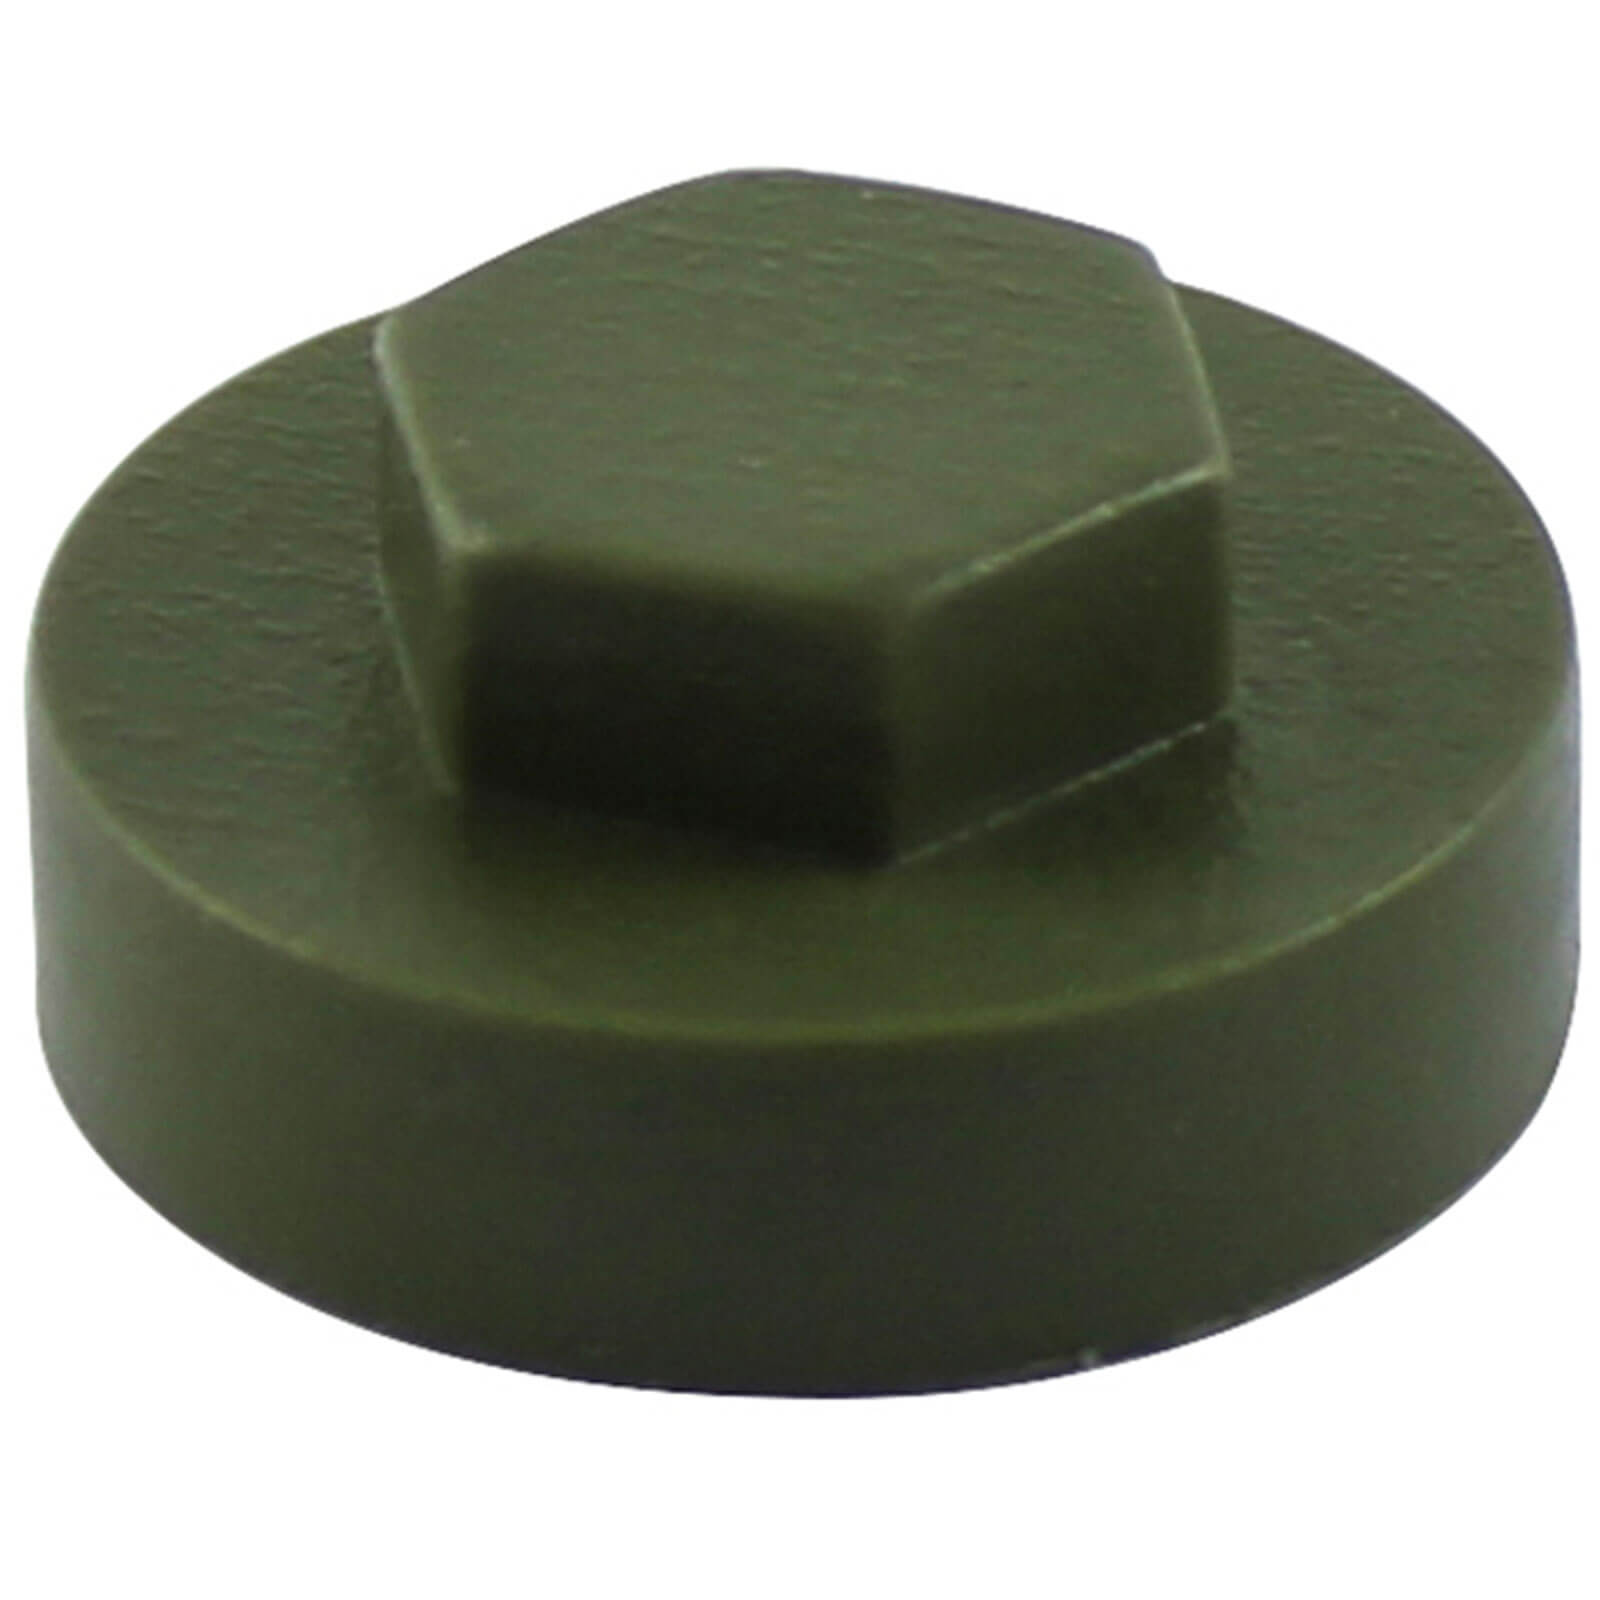 Image of Colour Match Hexagon Screw Cover Cap 5/16" x 16mm Olive Green Pack of 1000